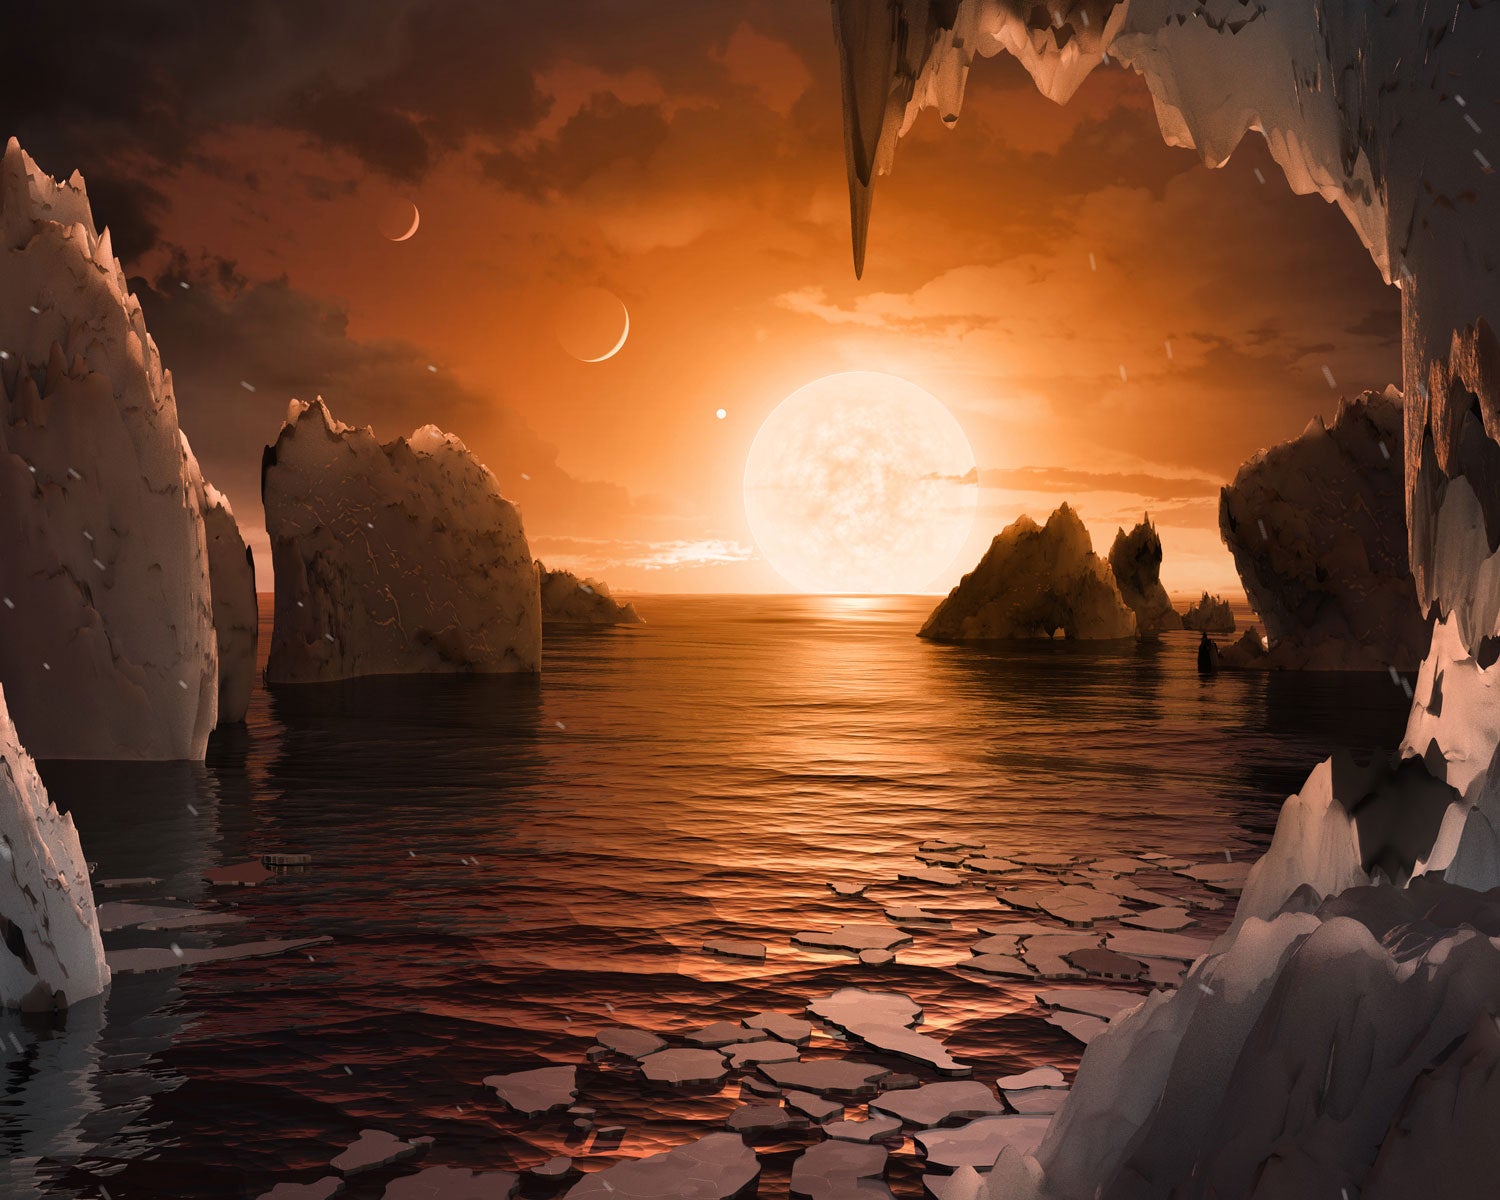 Artist's on the surface of the exoplanet TRAPPIST-1f, located in the TRAPPIST-1 system in the constellation Aquarius.